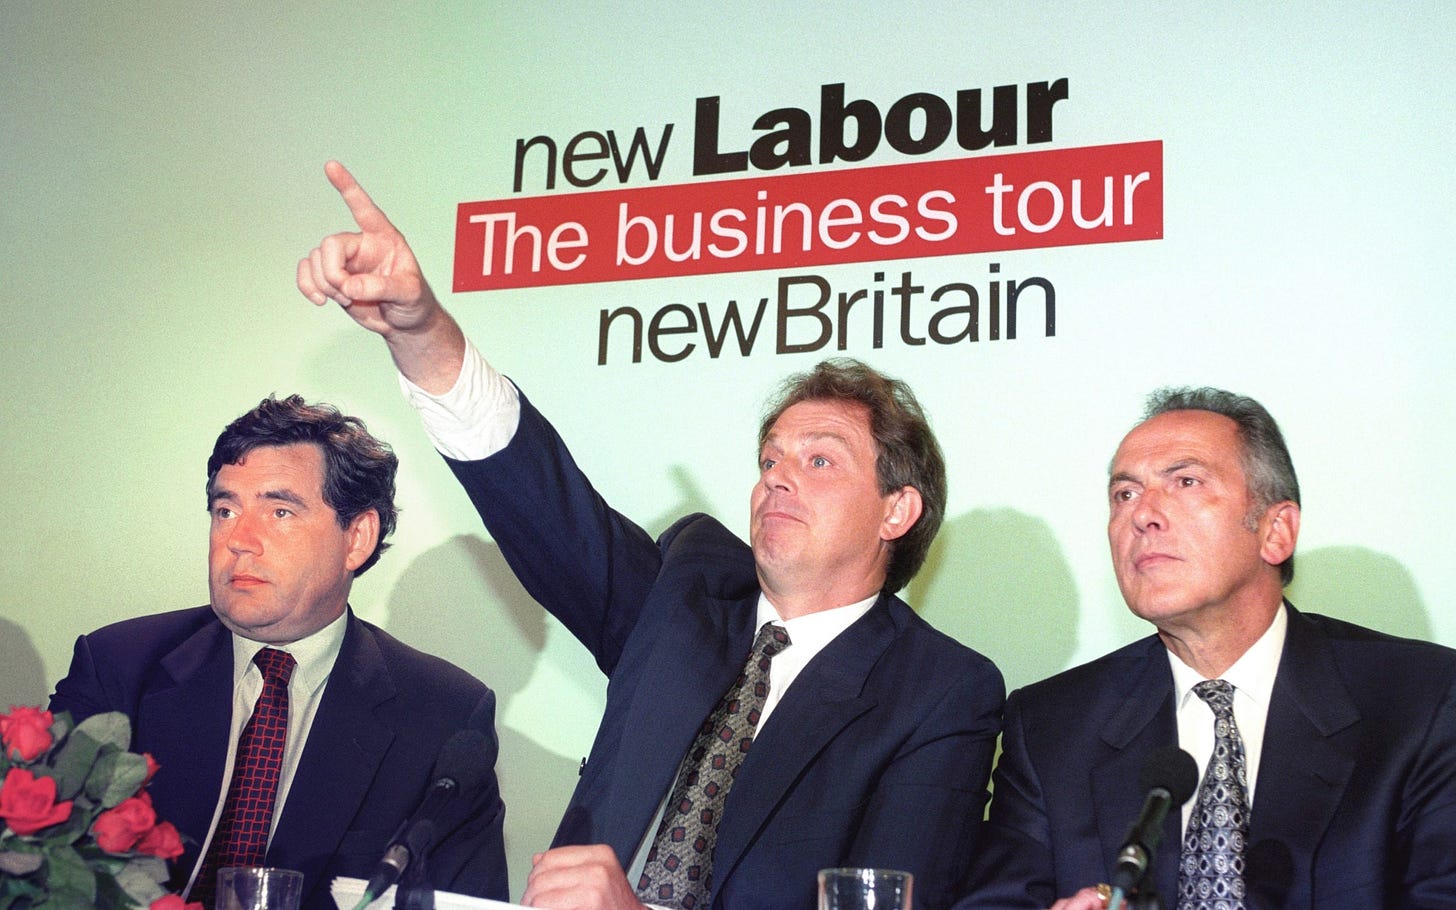 What Blair promised in the 1990s was sounder than anything Tories would  dare say now